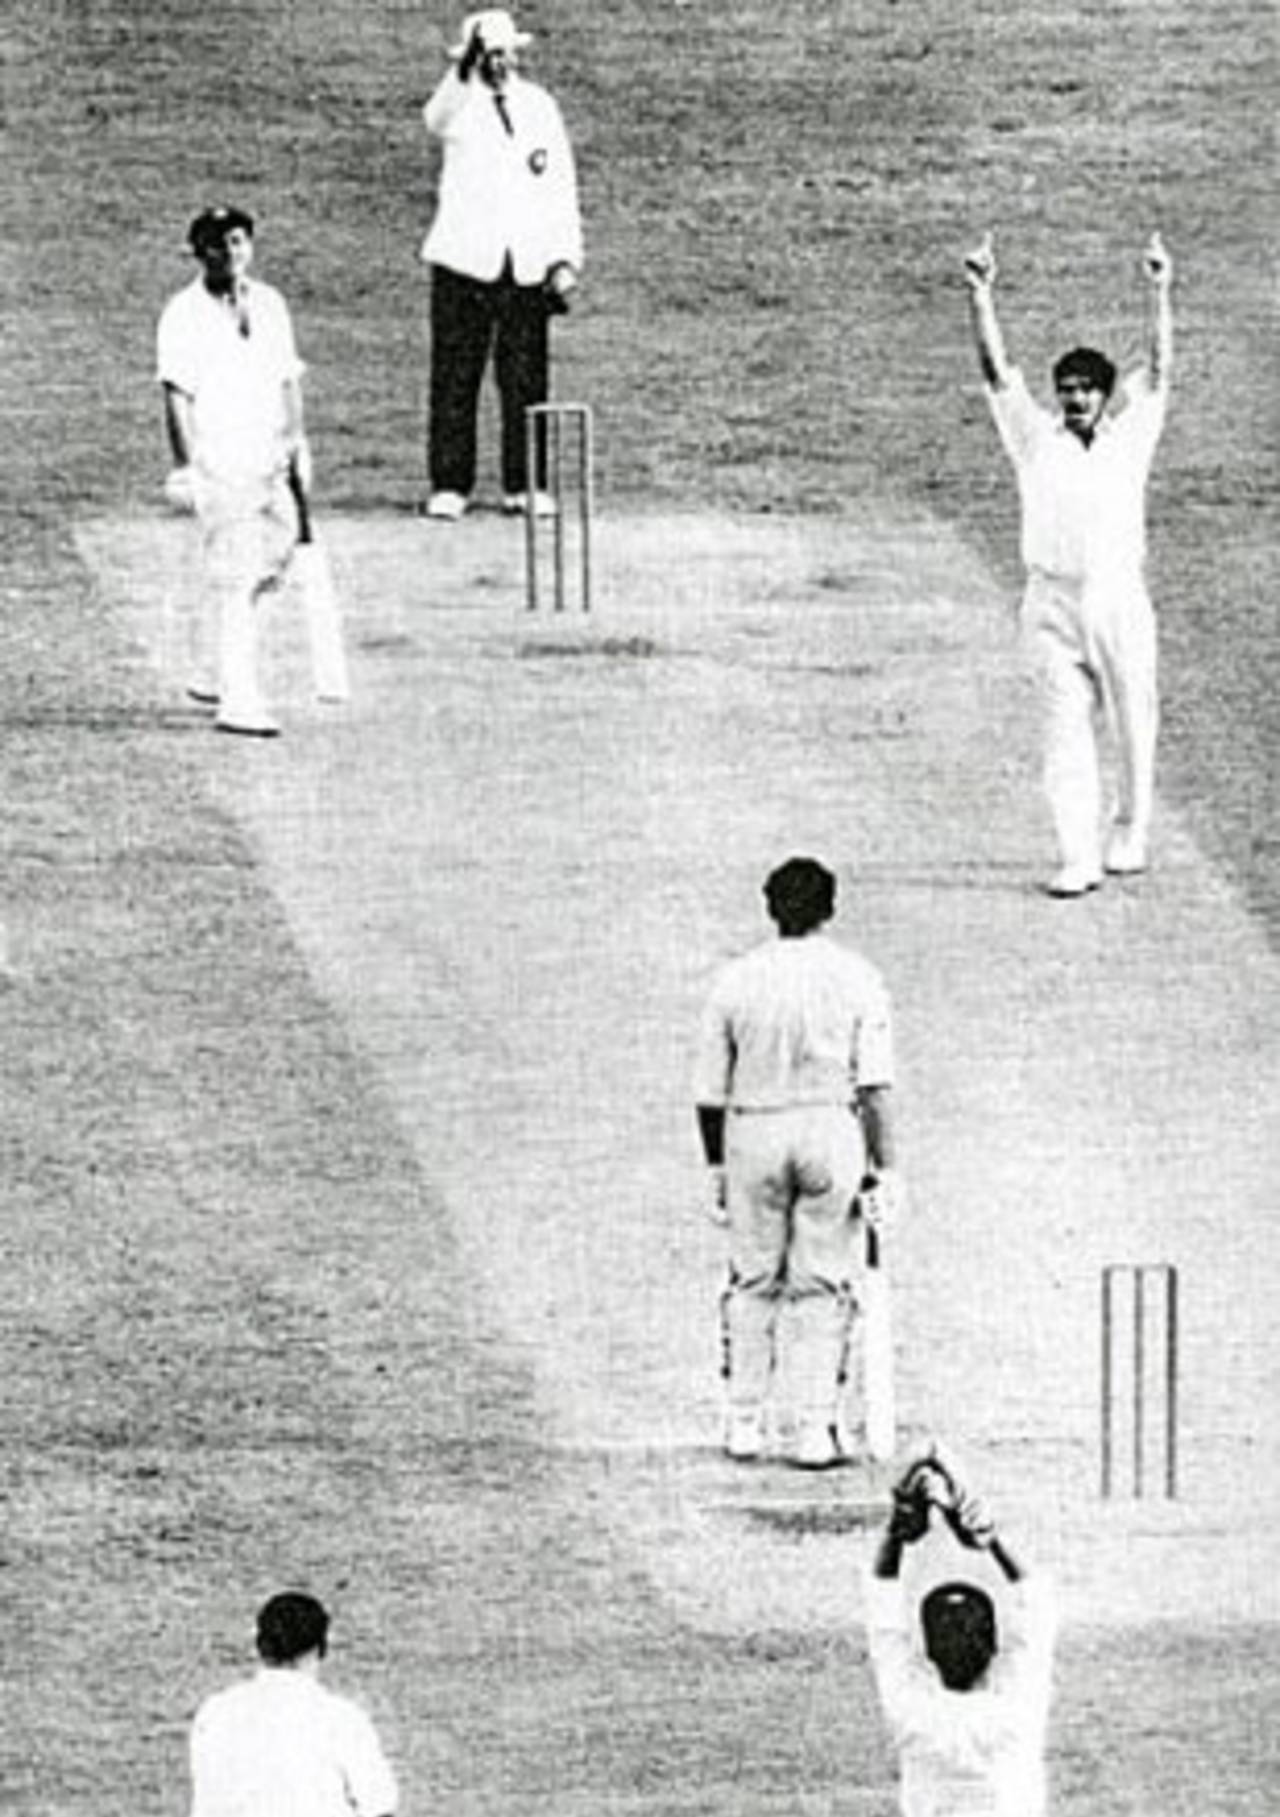 Fred Trueman took a five-for in the second innings despite being "under the weather"&nbsp;&nbsp;&bull;&nbsp;&nbsp;The Cricketer International